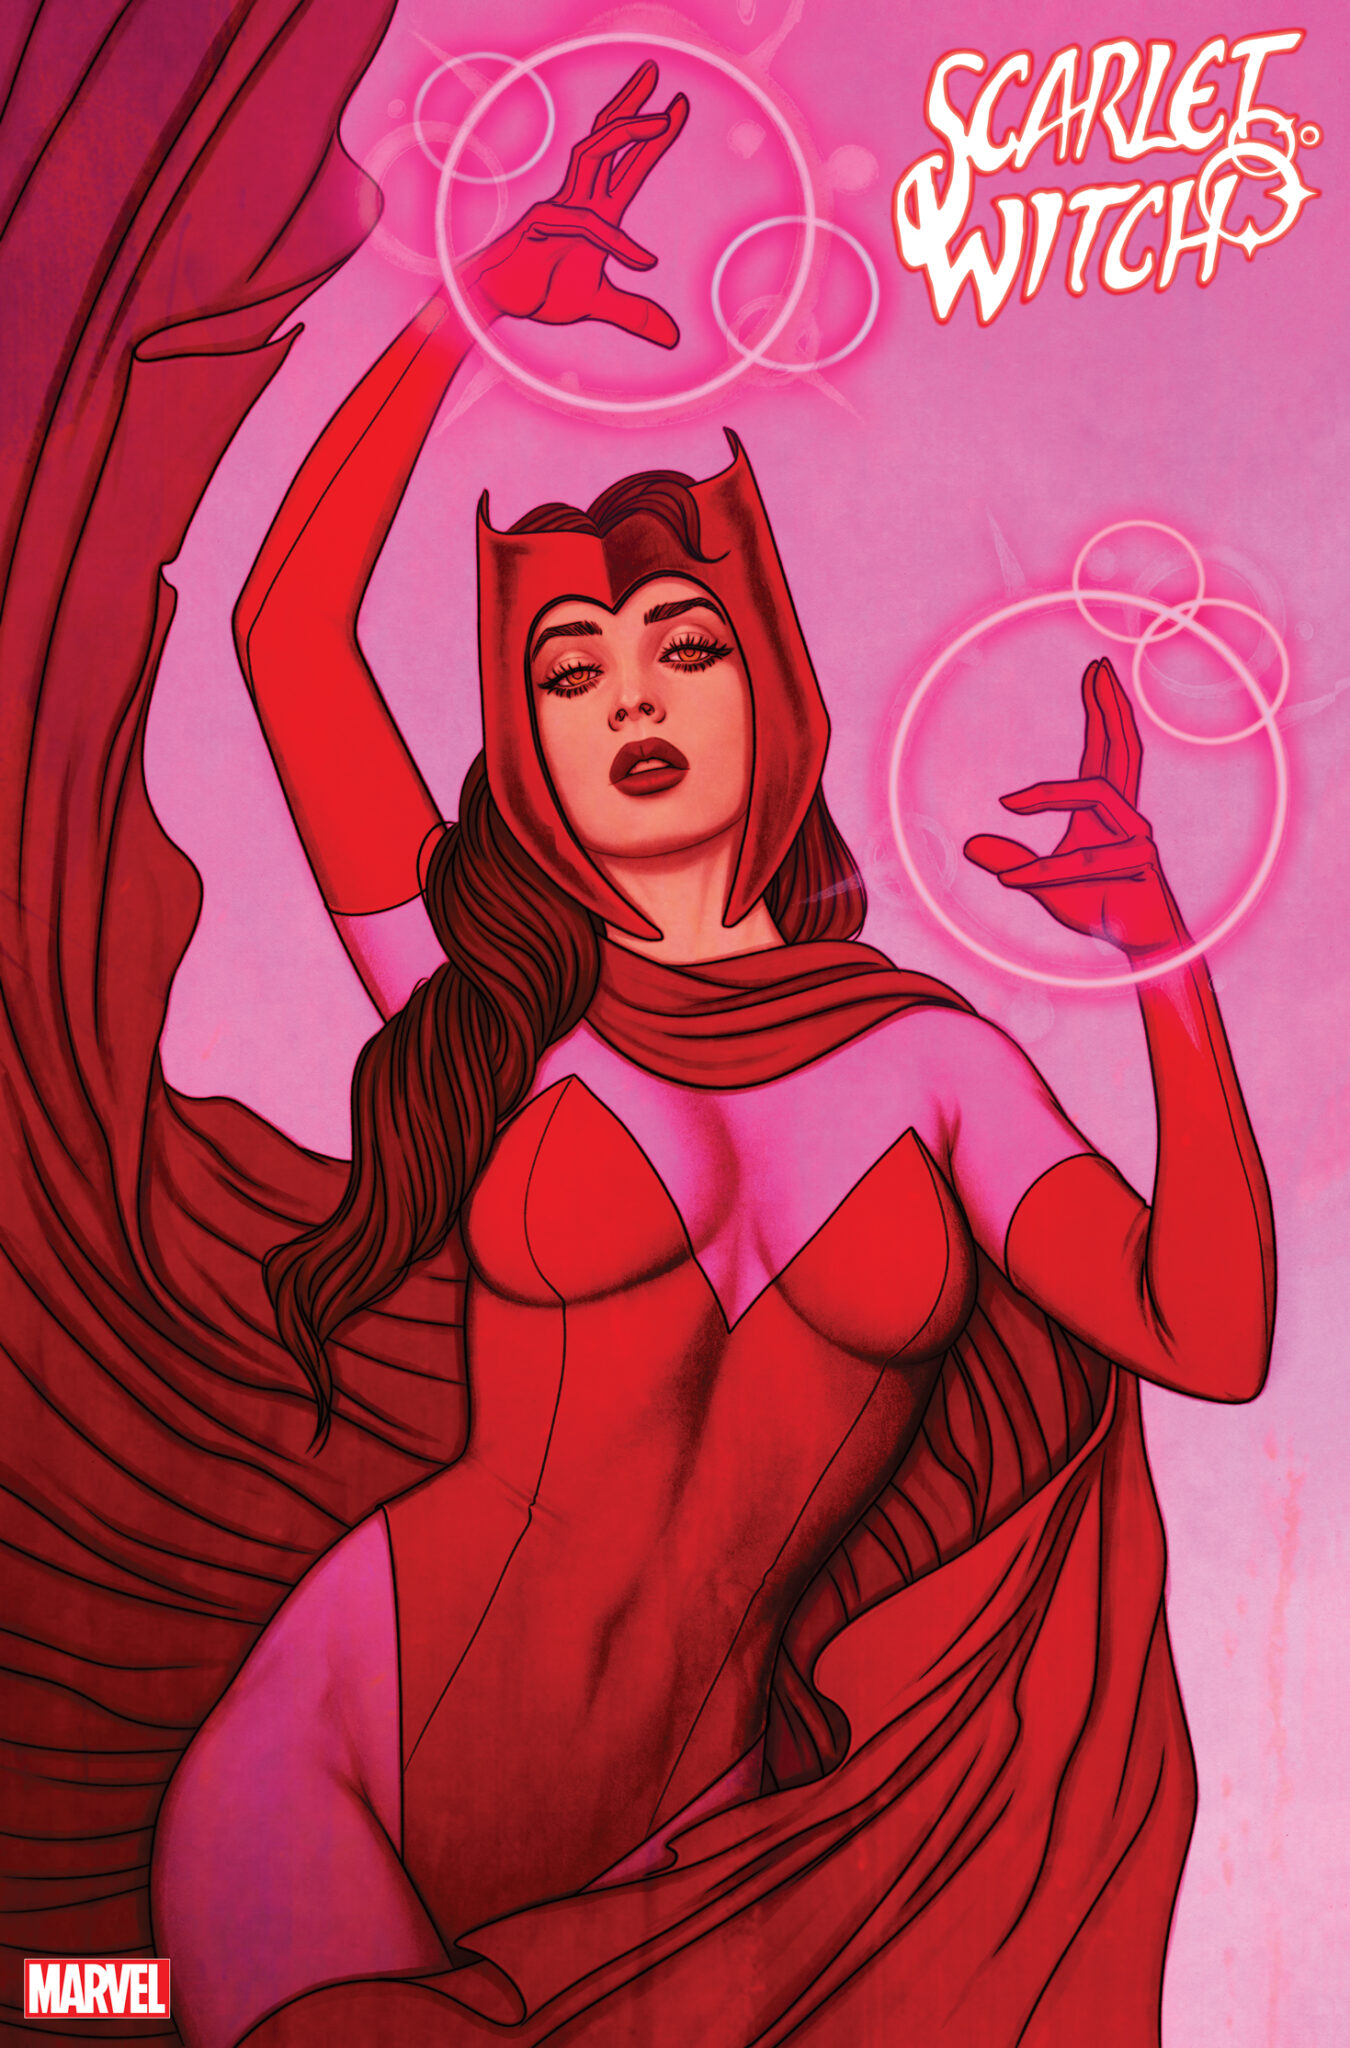 Scarlet Witch #1 Variant Cover by JENNY FRISON 